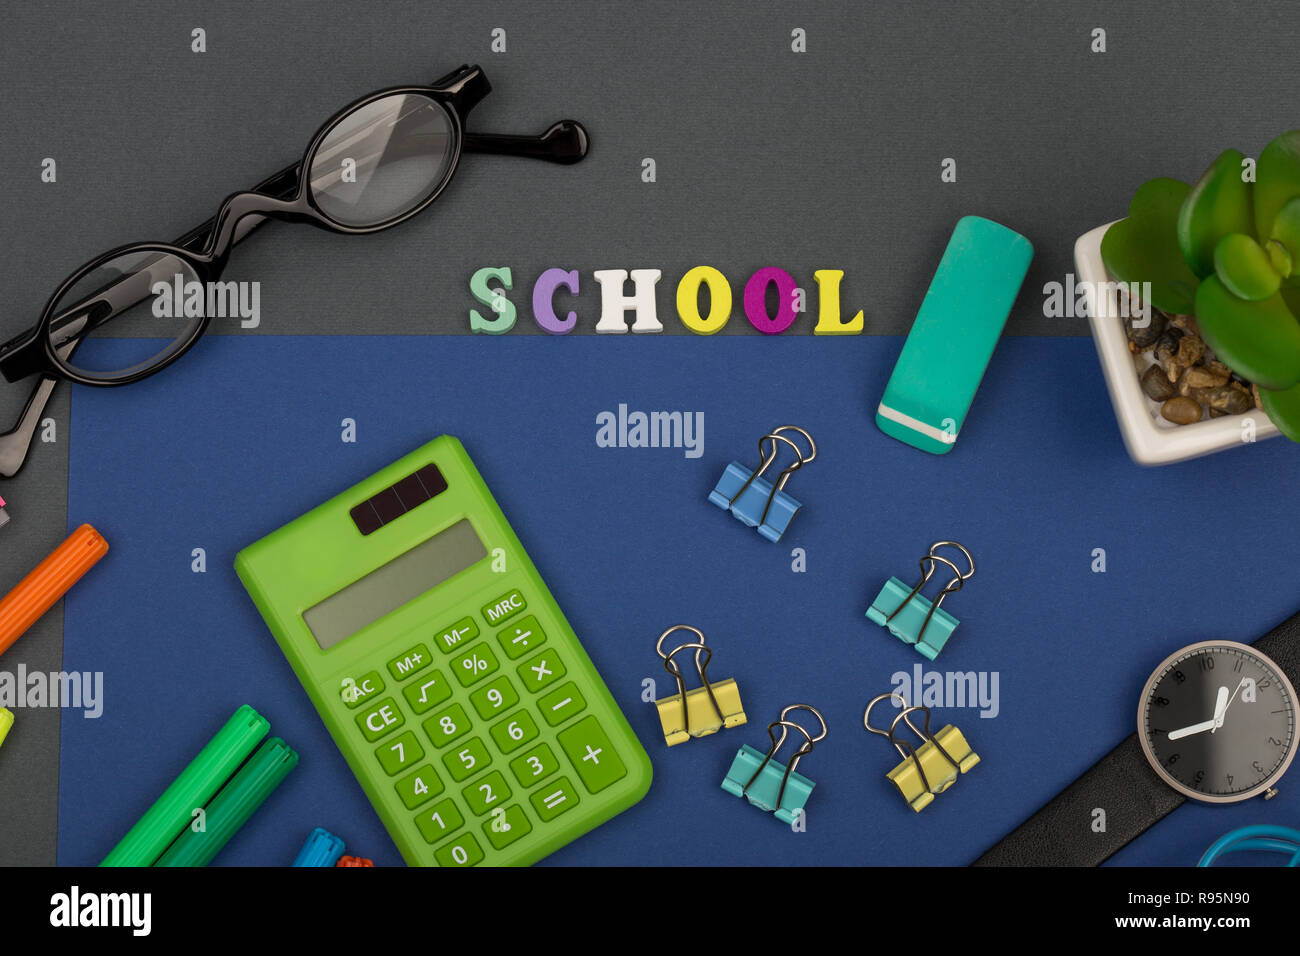 School set with blue paper, text "School" of wooden letters, calculator, markers, eyeglasses, watch and other stationery on grey background Stock Photo